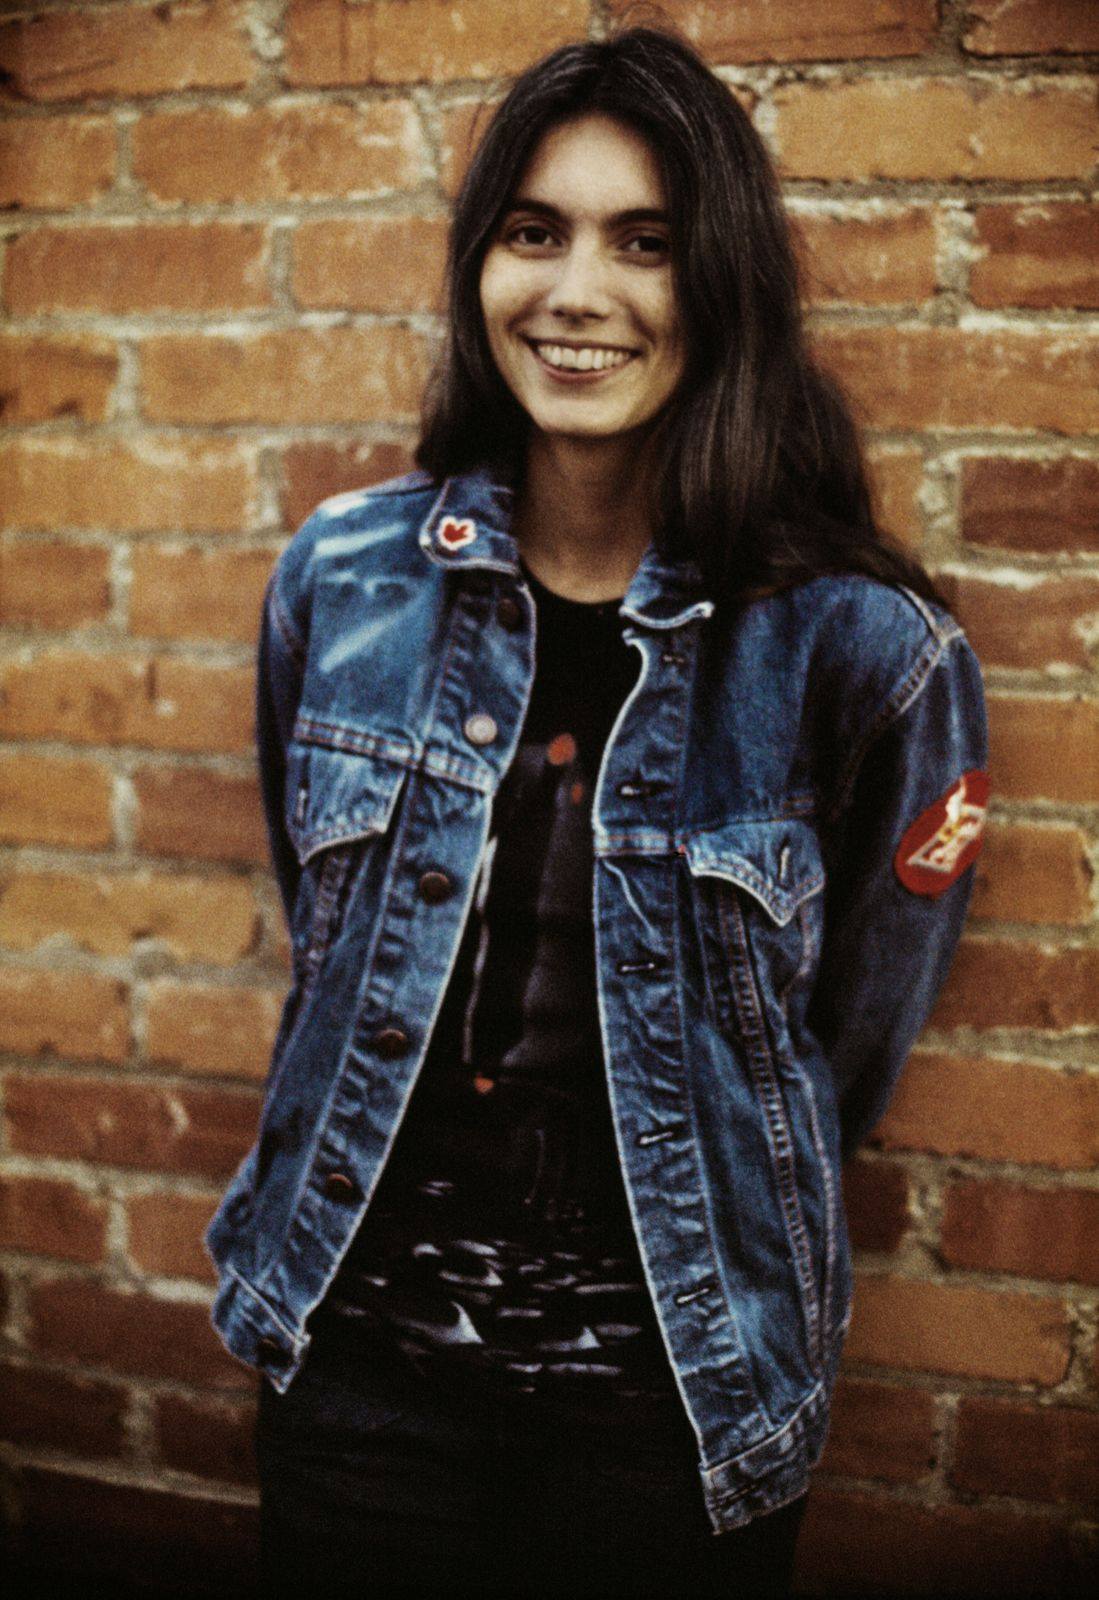 <p><span>The iconic Emmylou Harris, songstress, and country music legend, is captured in this photograph taken in Los Angeles in 1976. With a warm smile on her face and a twinkle in her eye, she radiates joy and nostalgia as she looks back at the camera. Her career began in 1973 with her debut album, <i>Pieces of the Sky</i>, which was praised by critics for its mix of traditional and modern country elements. Since then, she has released more than 25 albums and won 14 Grammys, making her one of the most successful female singers of all time. This timeless image captures the essence of Emmylou’s spirit and talent, reminding us why we love her so much.</span></p>